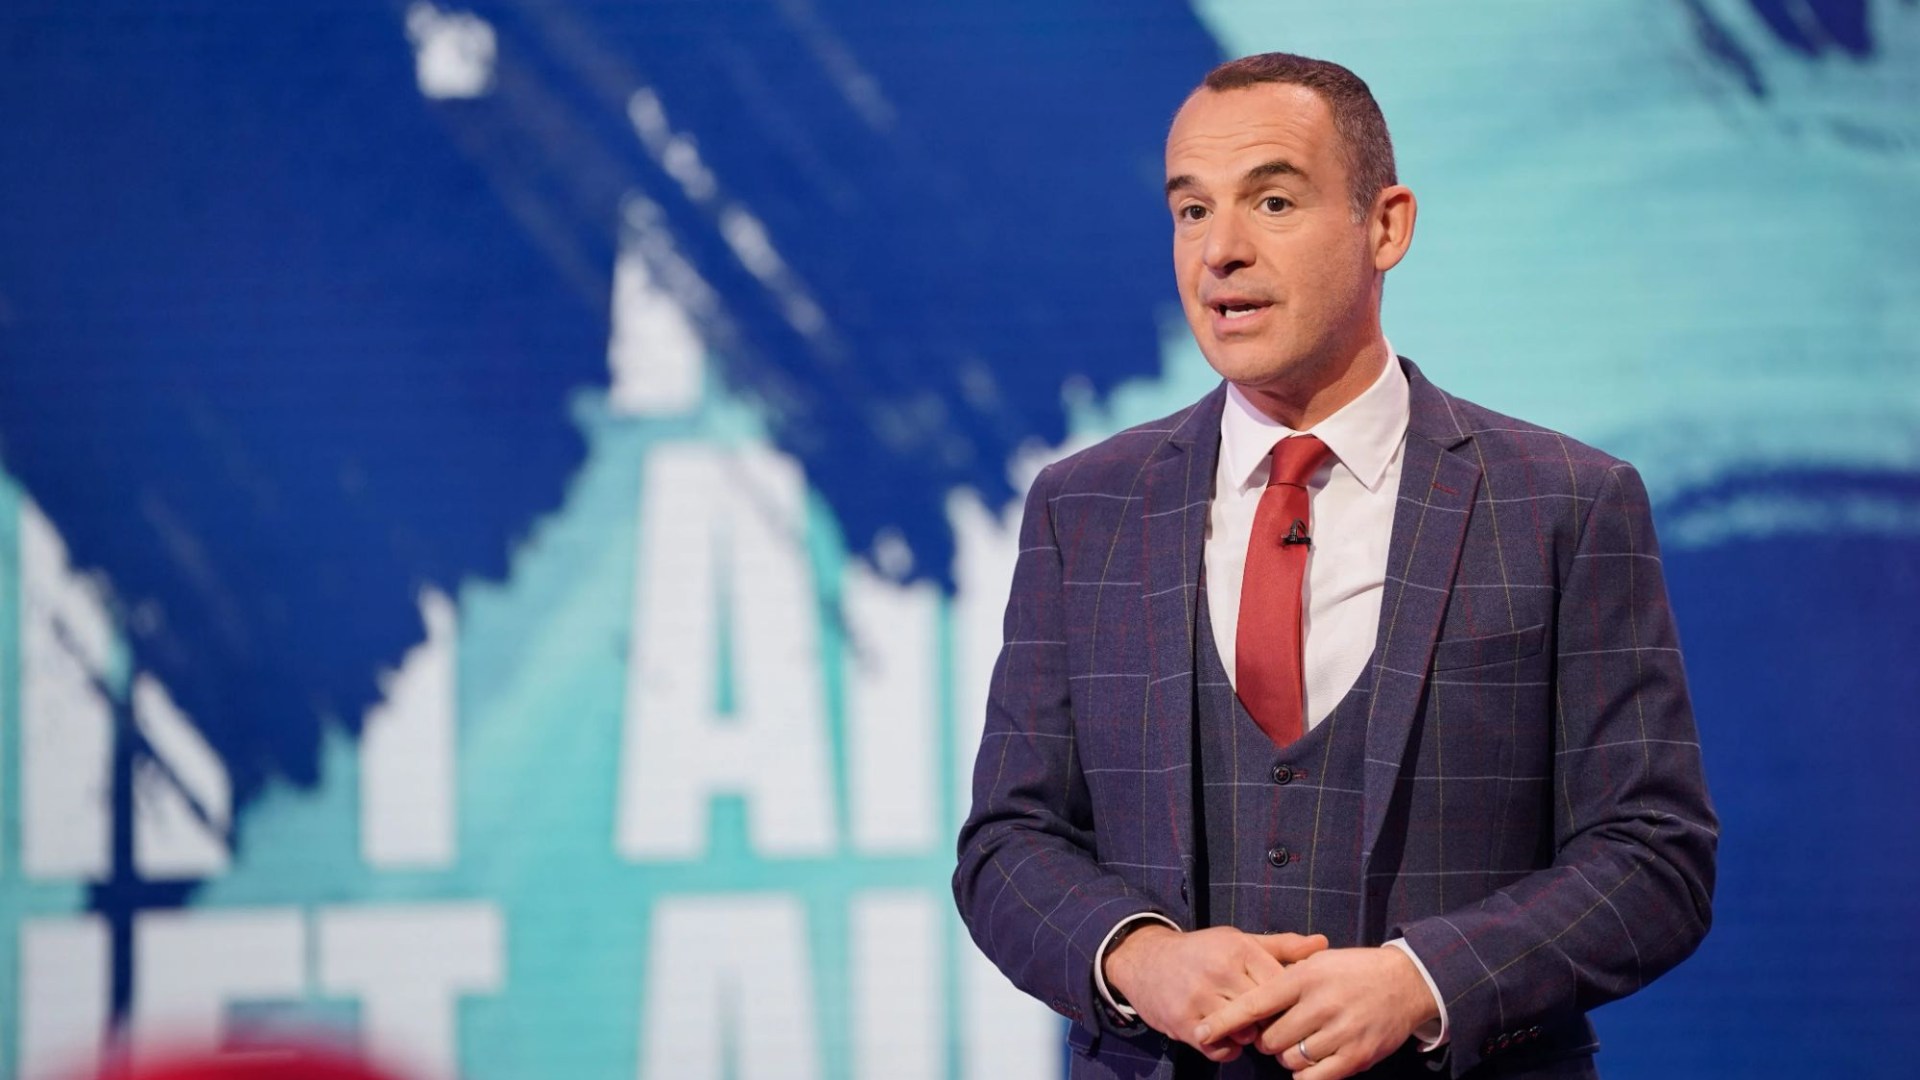 Martin Lewis issues dont ignore warning as hundreds of thousands owed up to 5,000 – see if youll get a letter [Video]